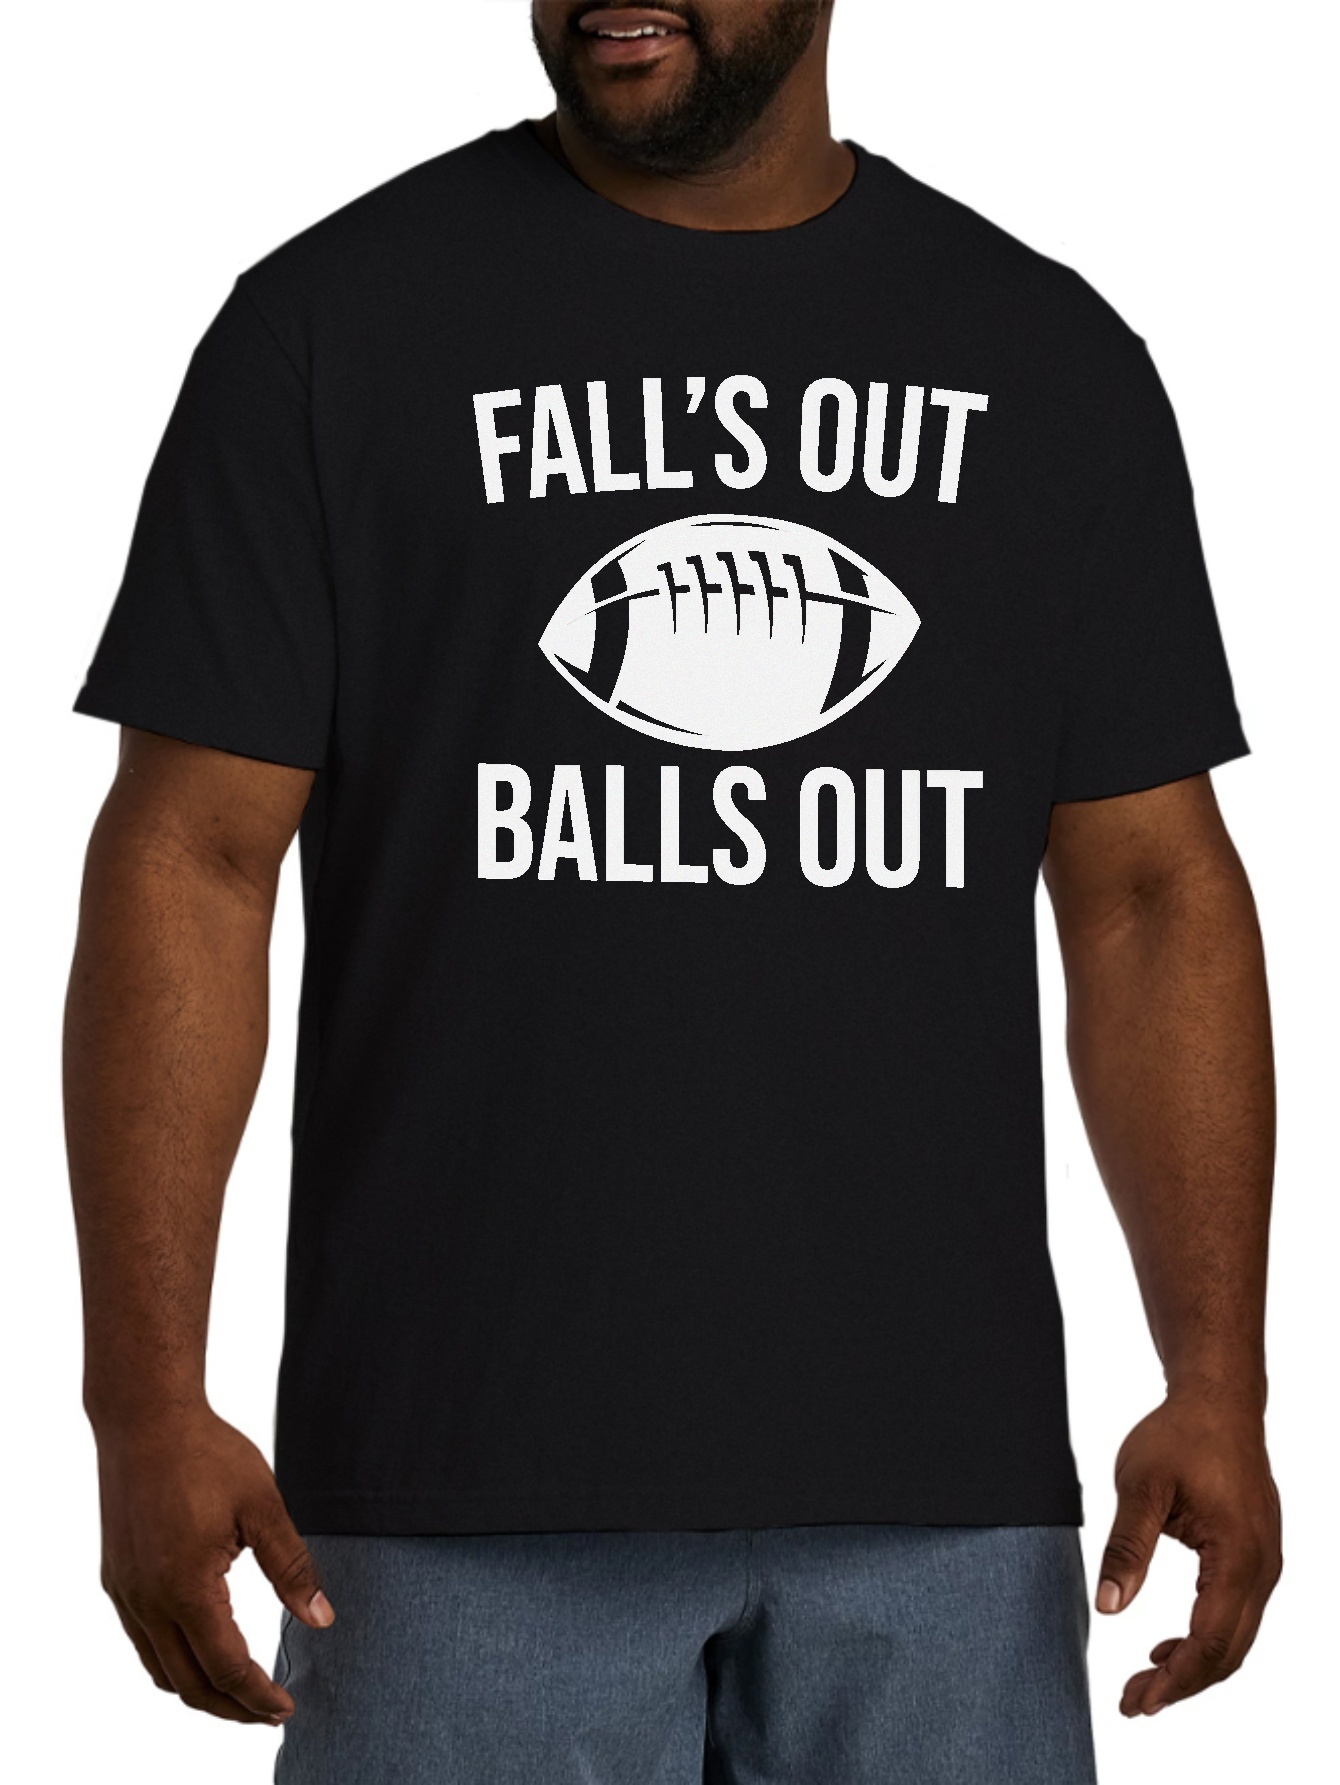 Temu Oversized T-Shirt for Men, American Football Fall's Out Balls Out Graphic Print T-Shirt Short Sleeve Tees Casual Fashion Tops for Summer, Men's